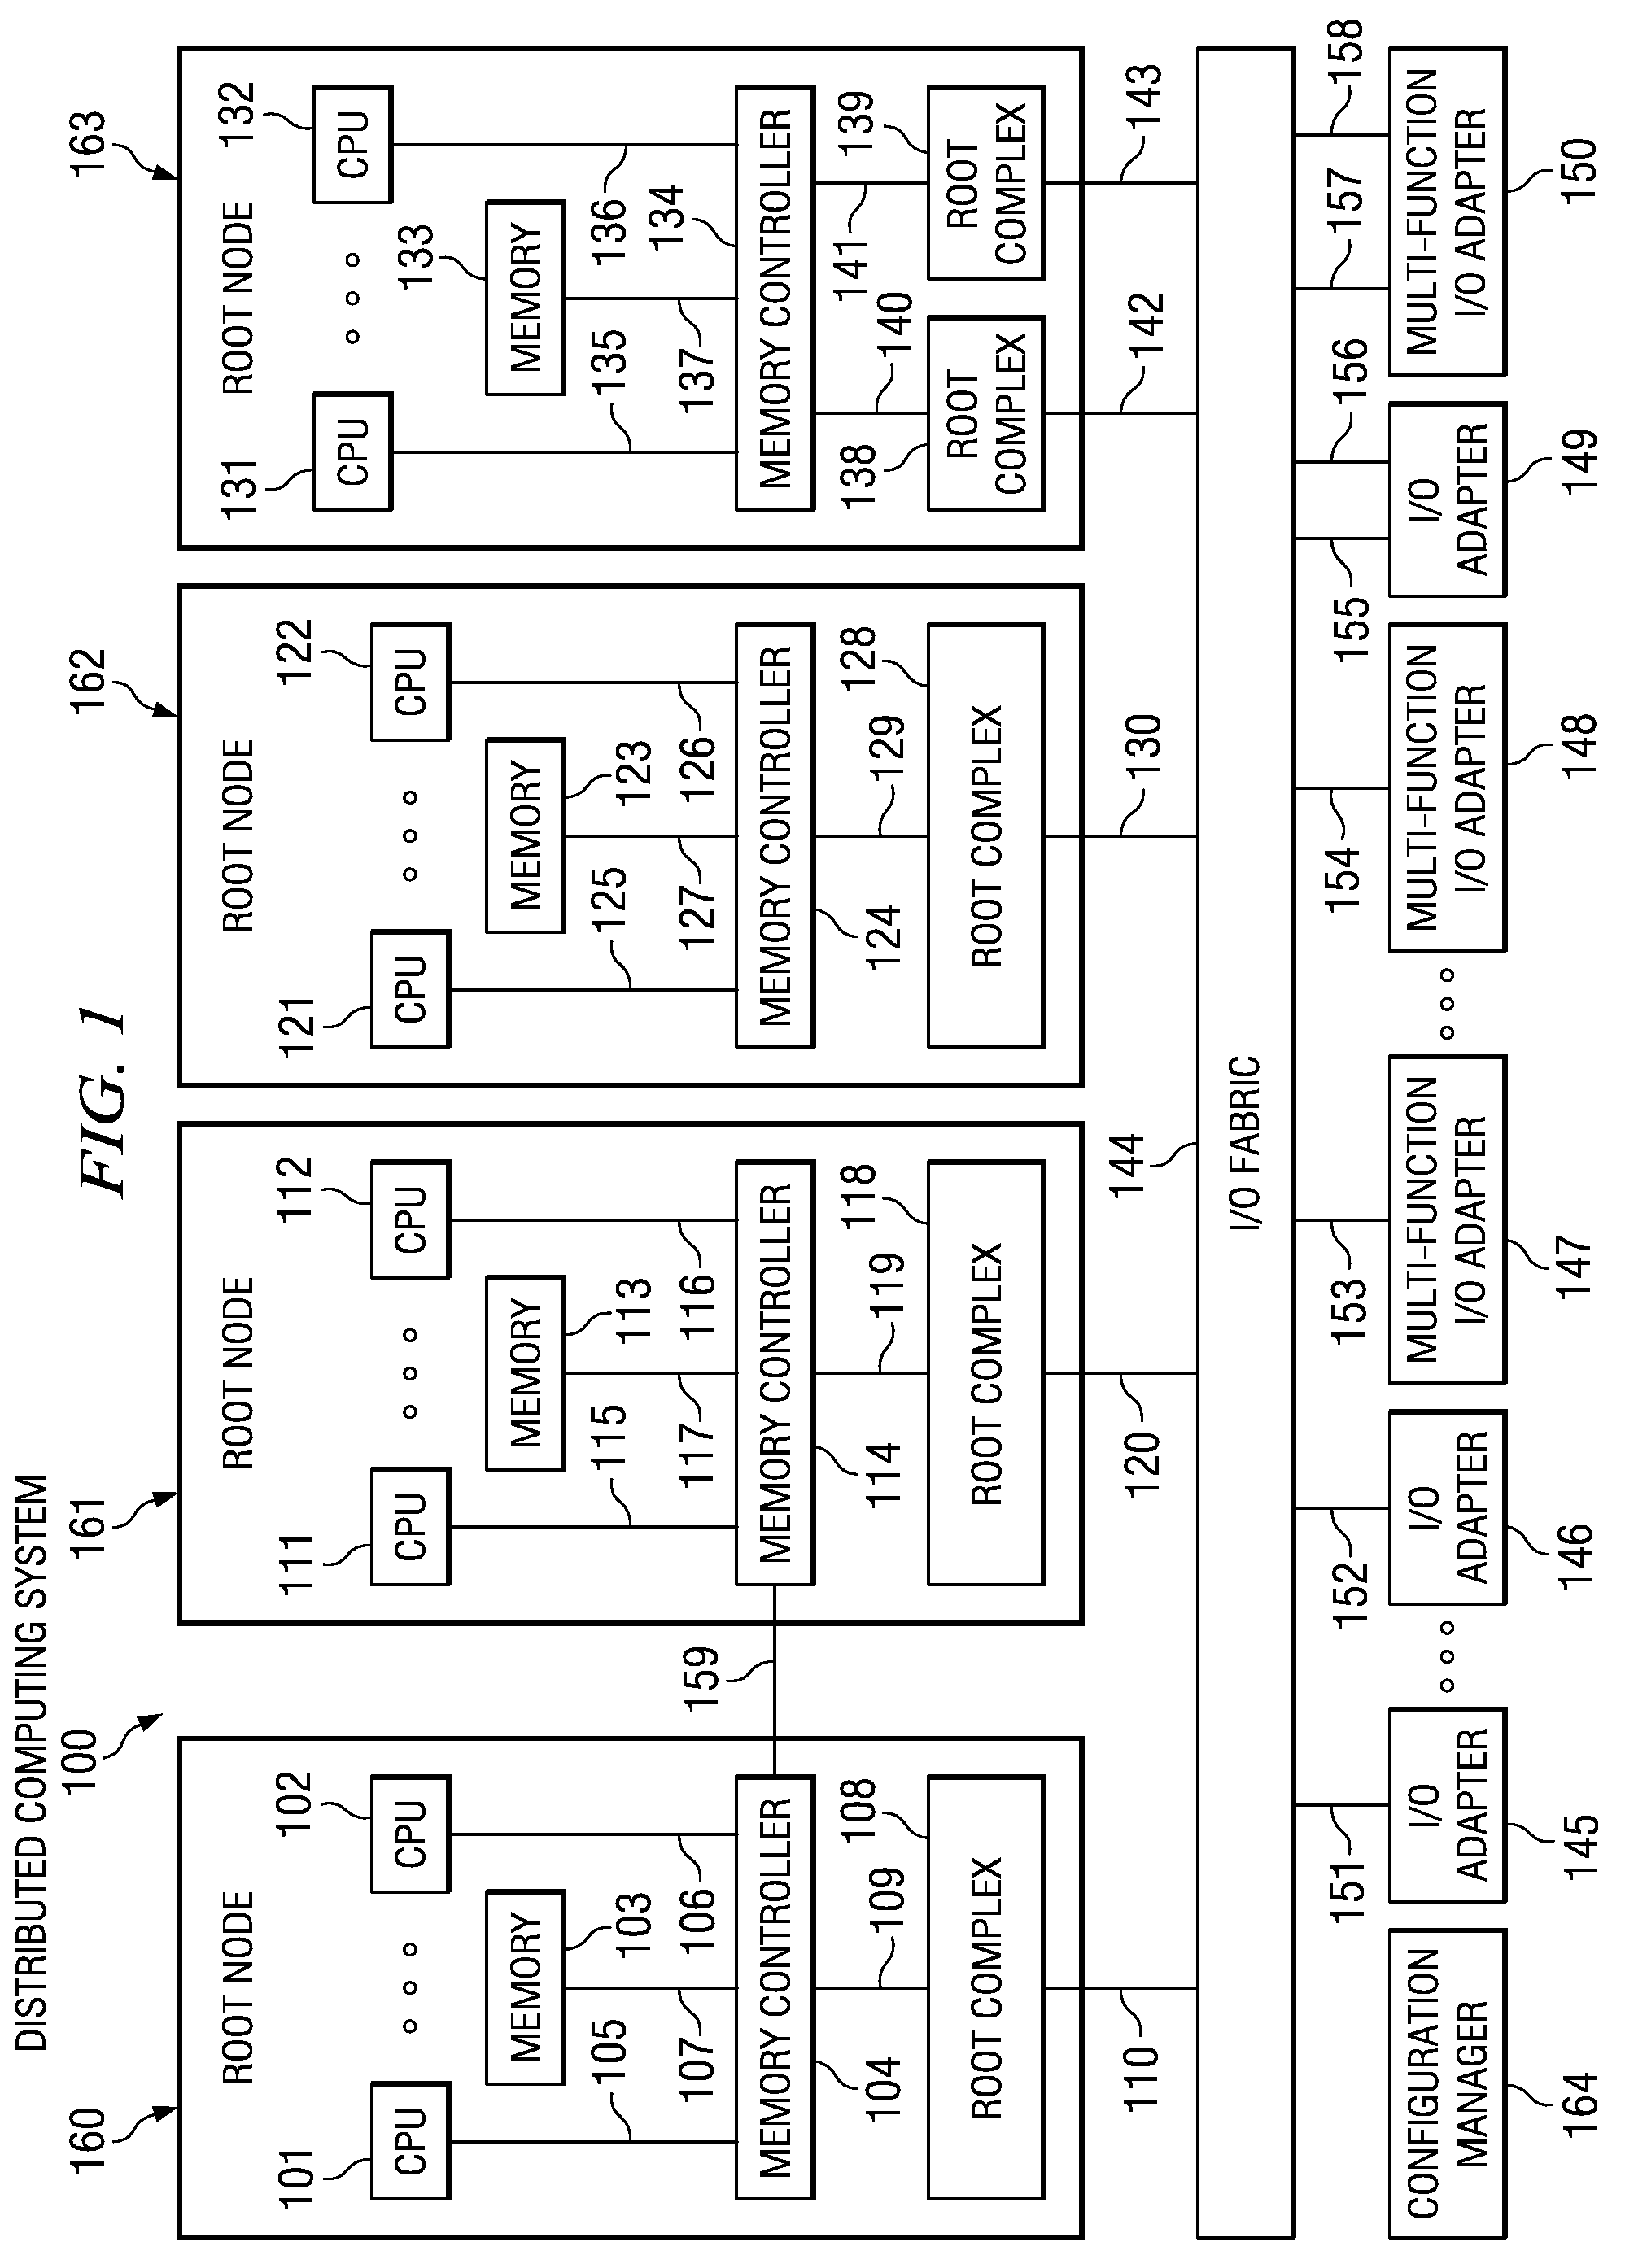 Bus/device/function translation within and routing of communications packets in a PCI switched-fabric in a multi-host environment utilizing multiple root switches